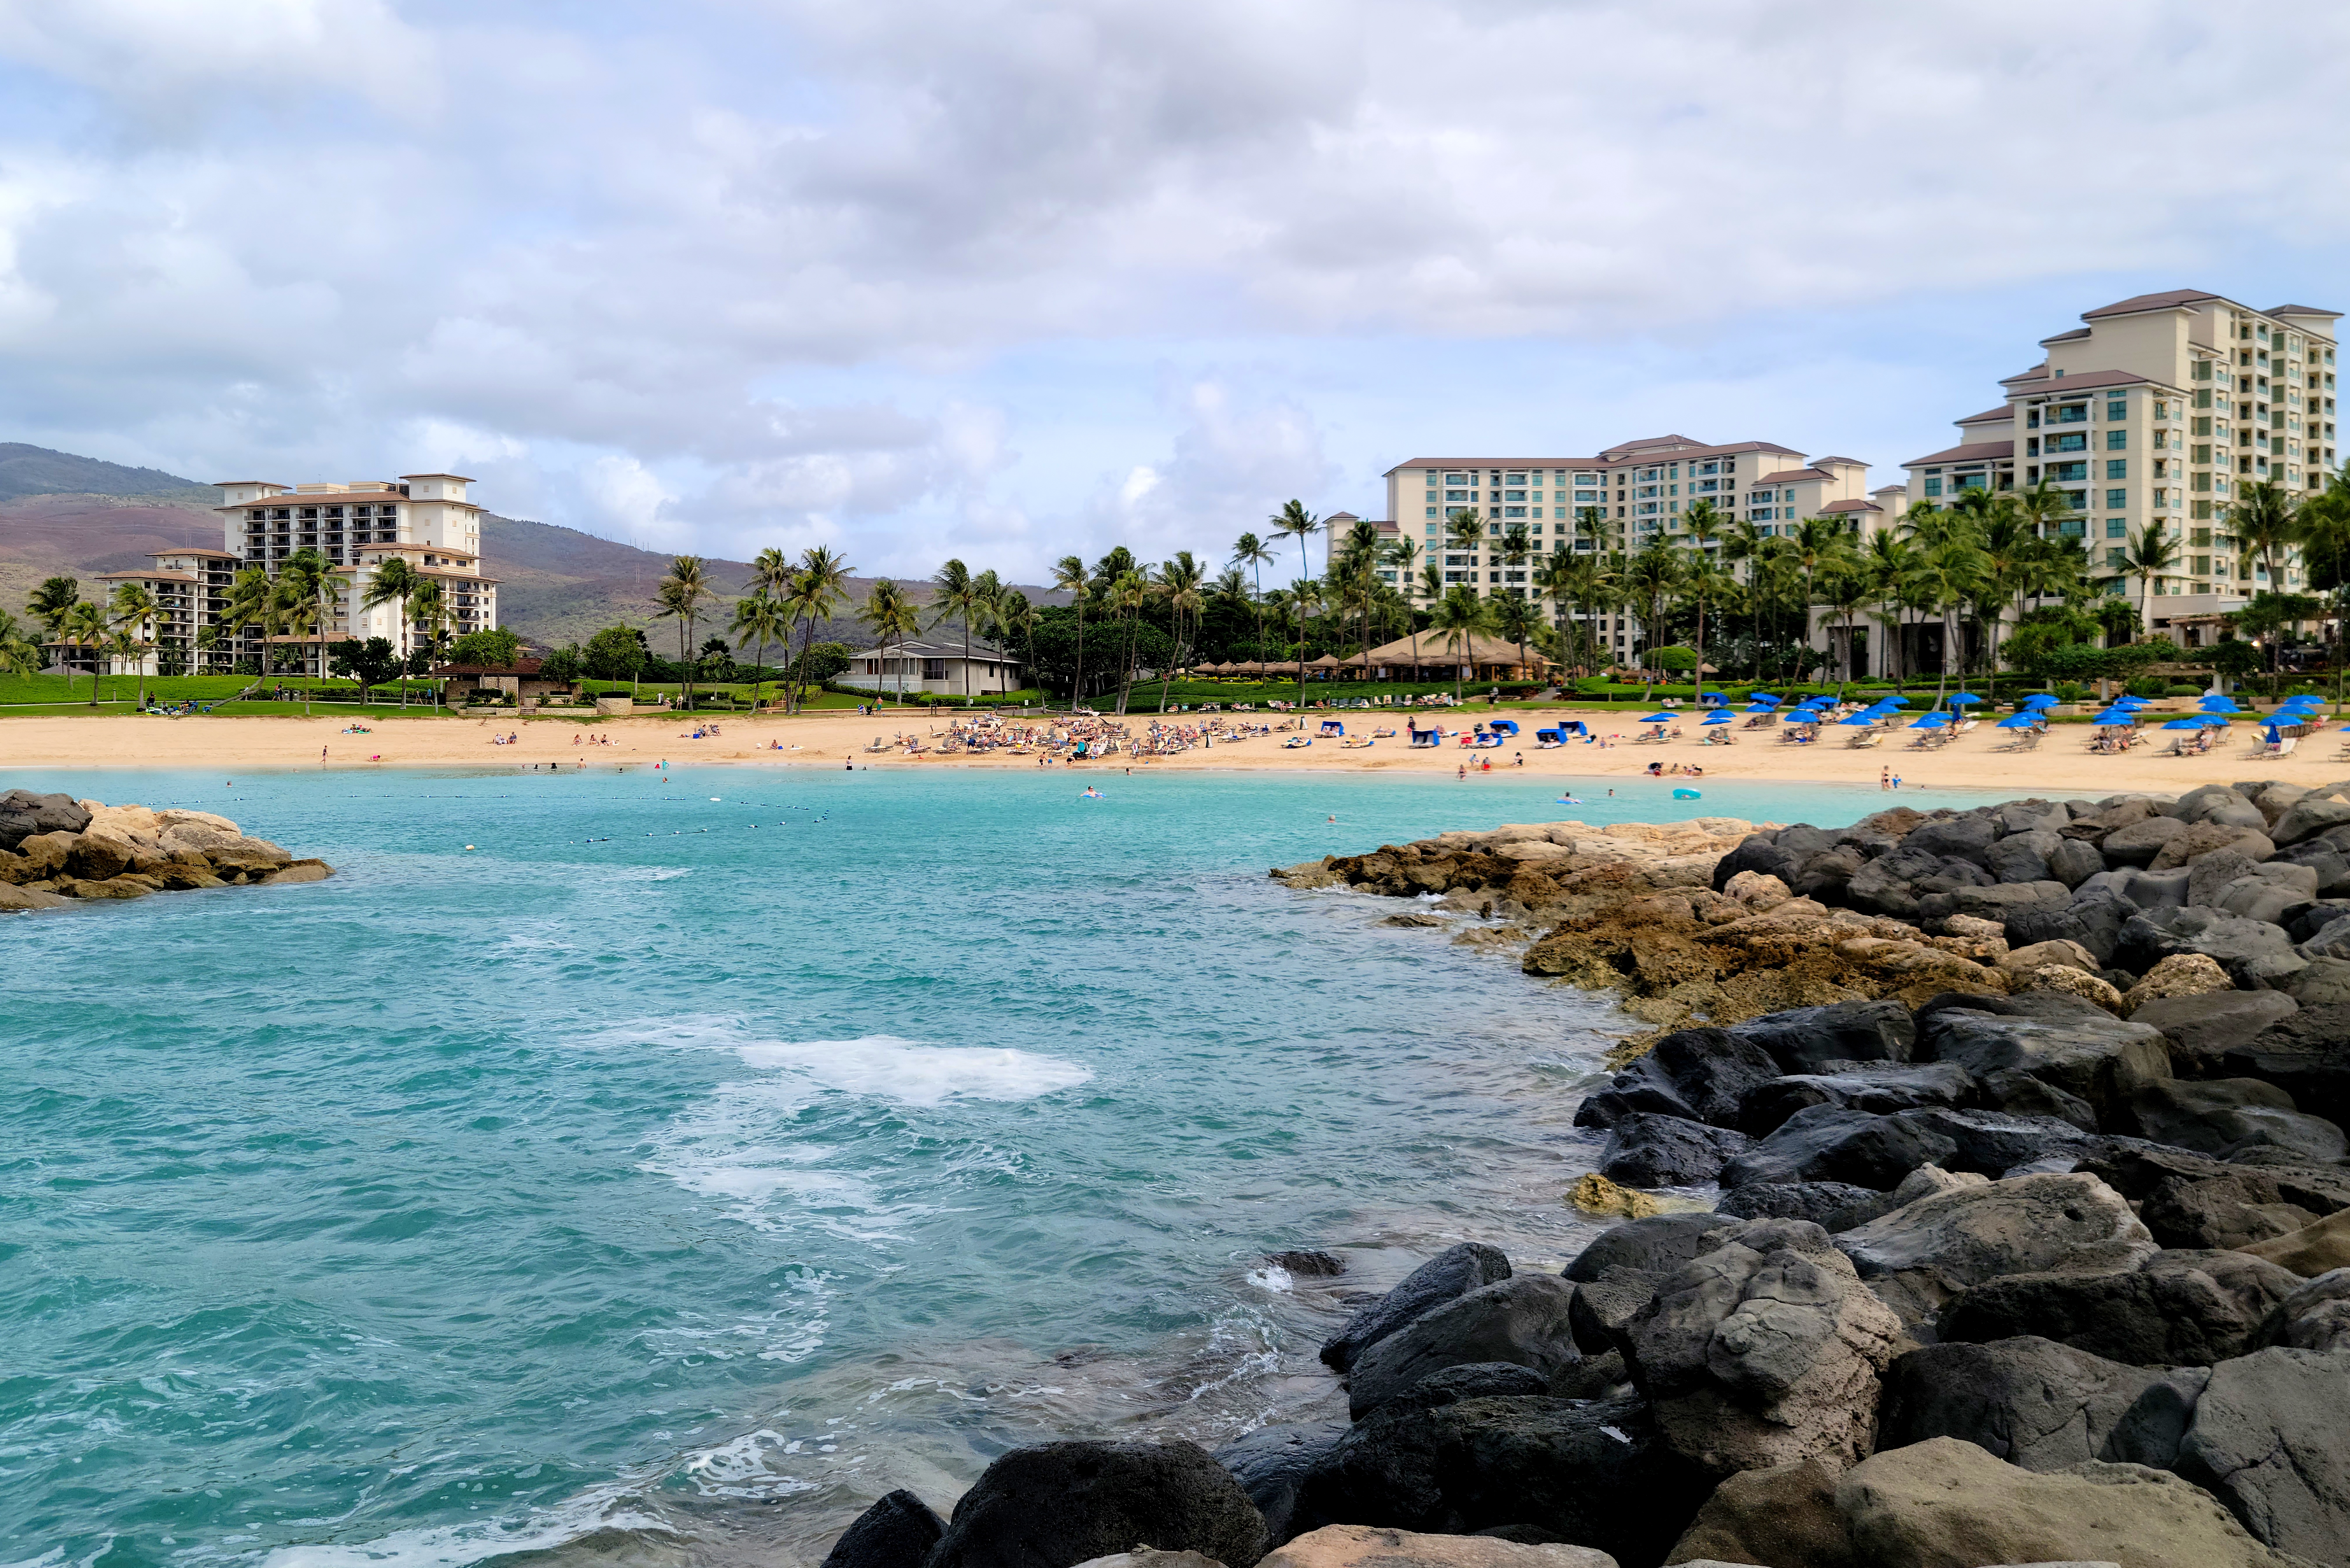 Photos from our stay at Marriott Ko Olina Beach Club in Oahu, Hawaii